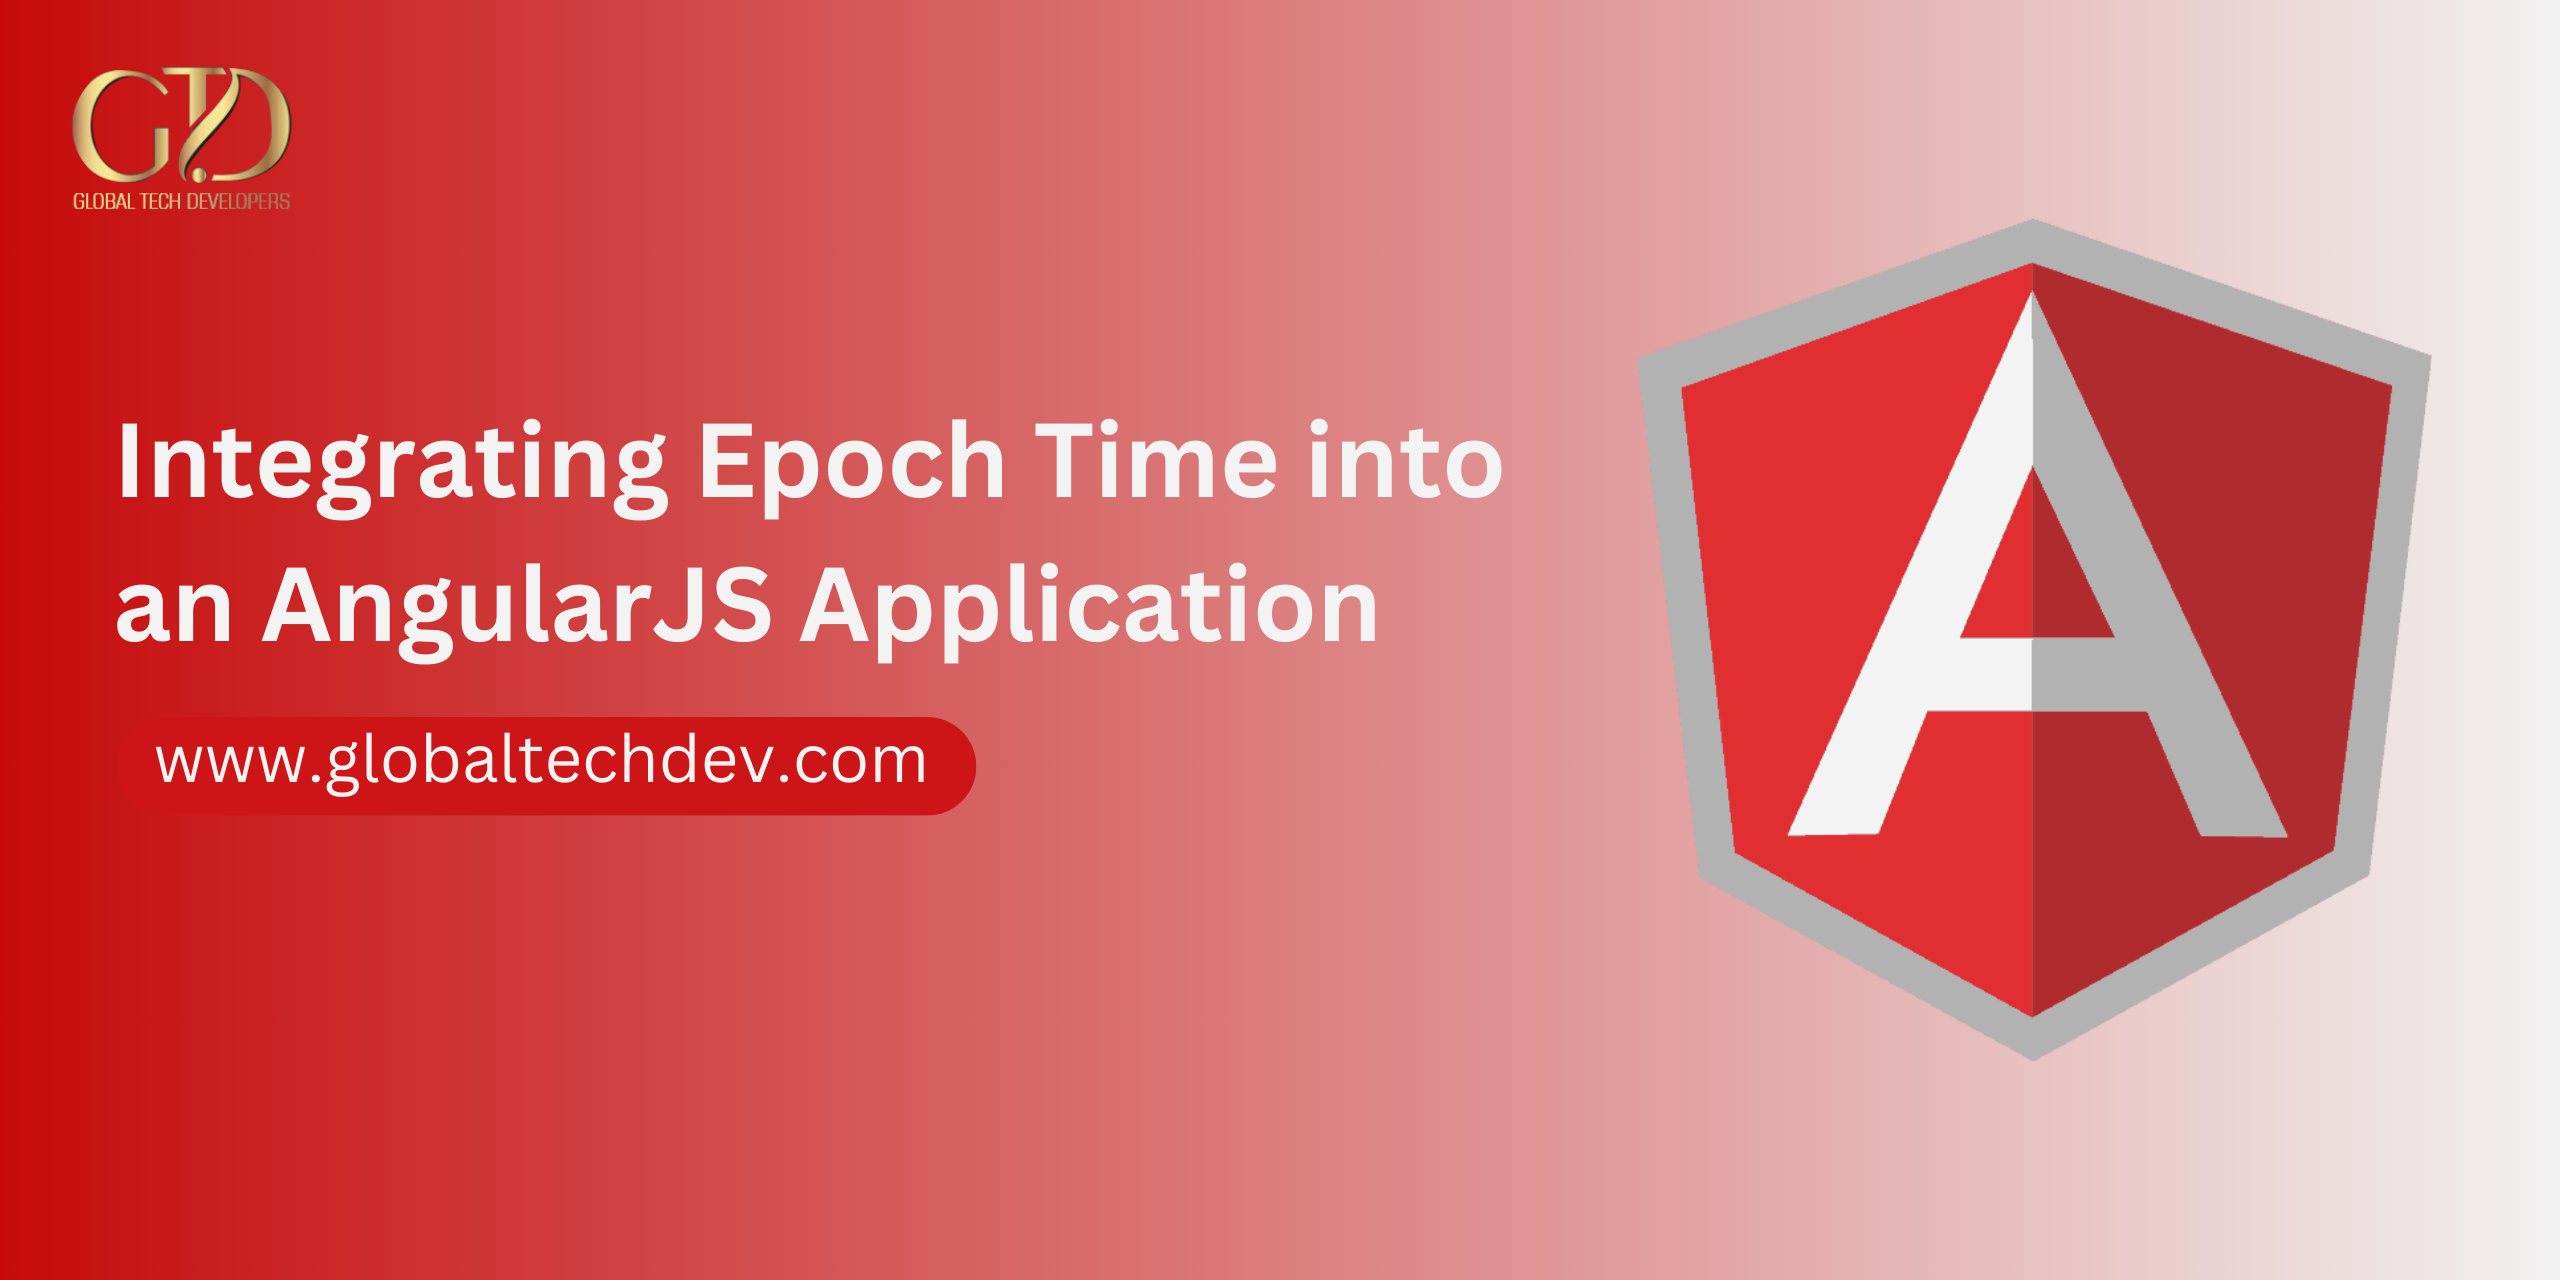 Integrating Epoch Time into an AngularJS Application